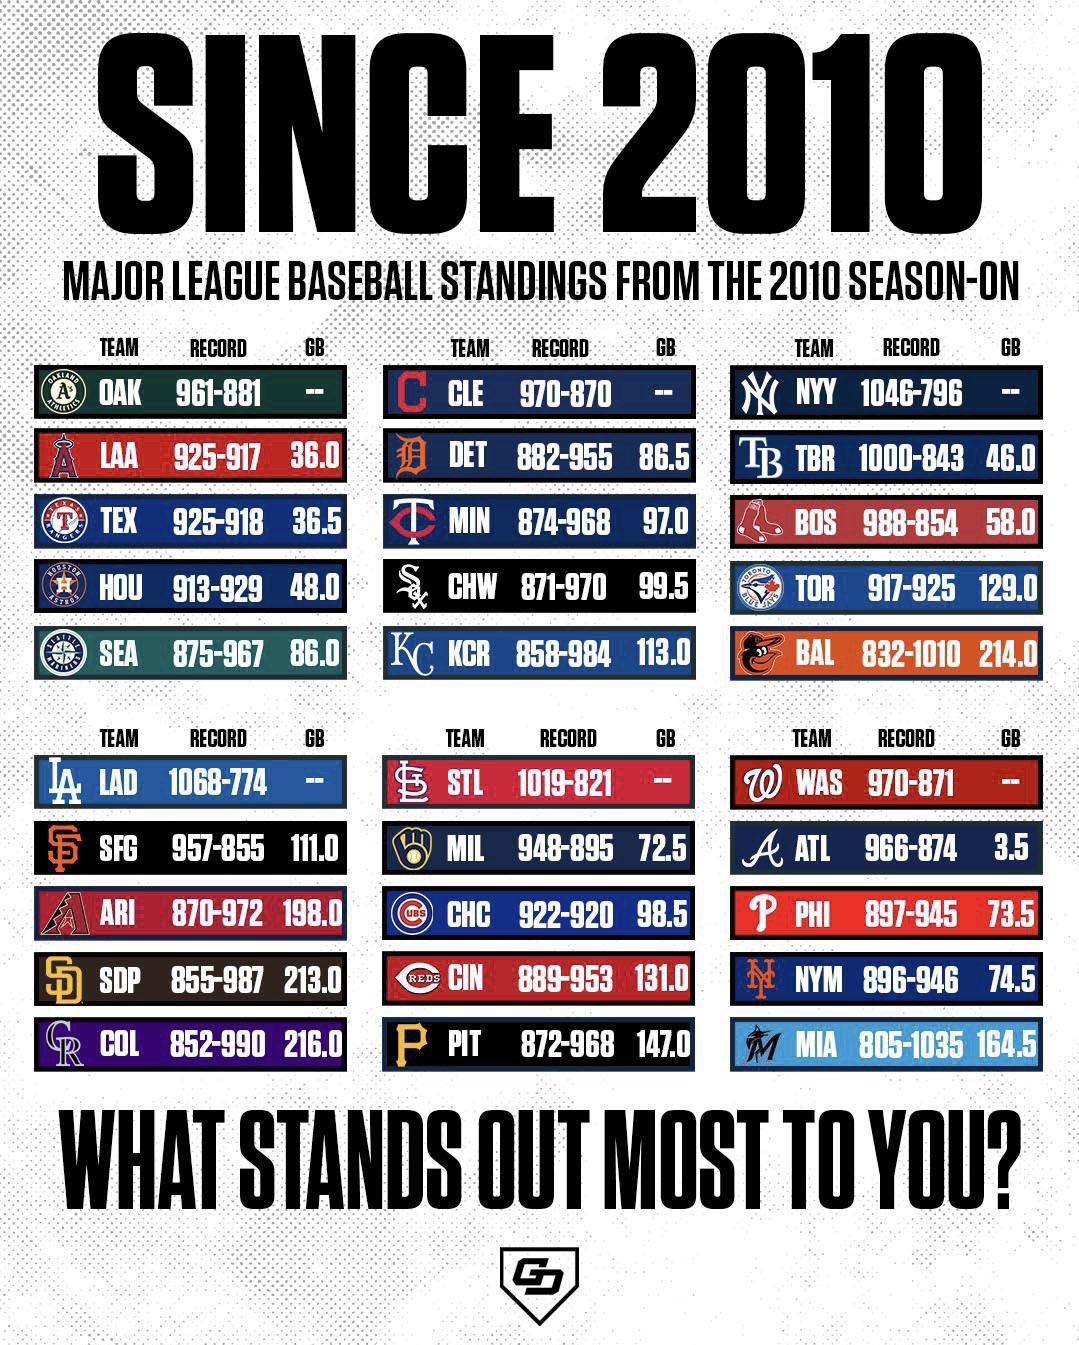 Talkin’ Baseball on Twitter "The MLB standings since 2010. A lot to